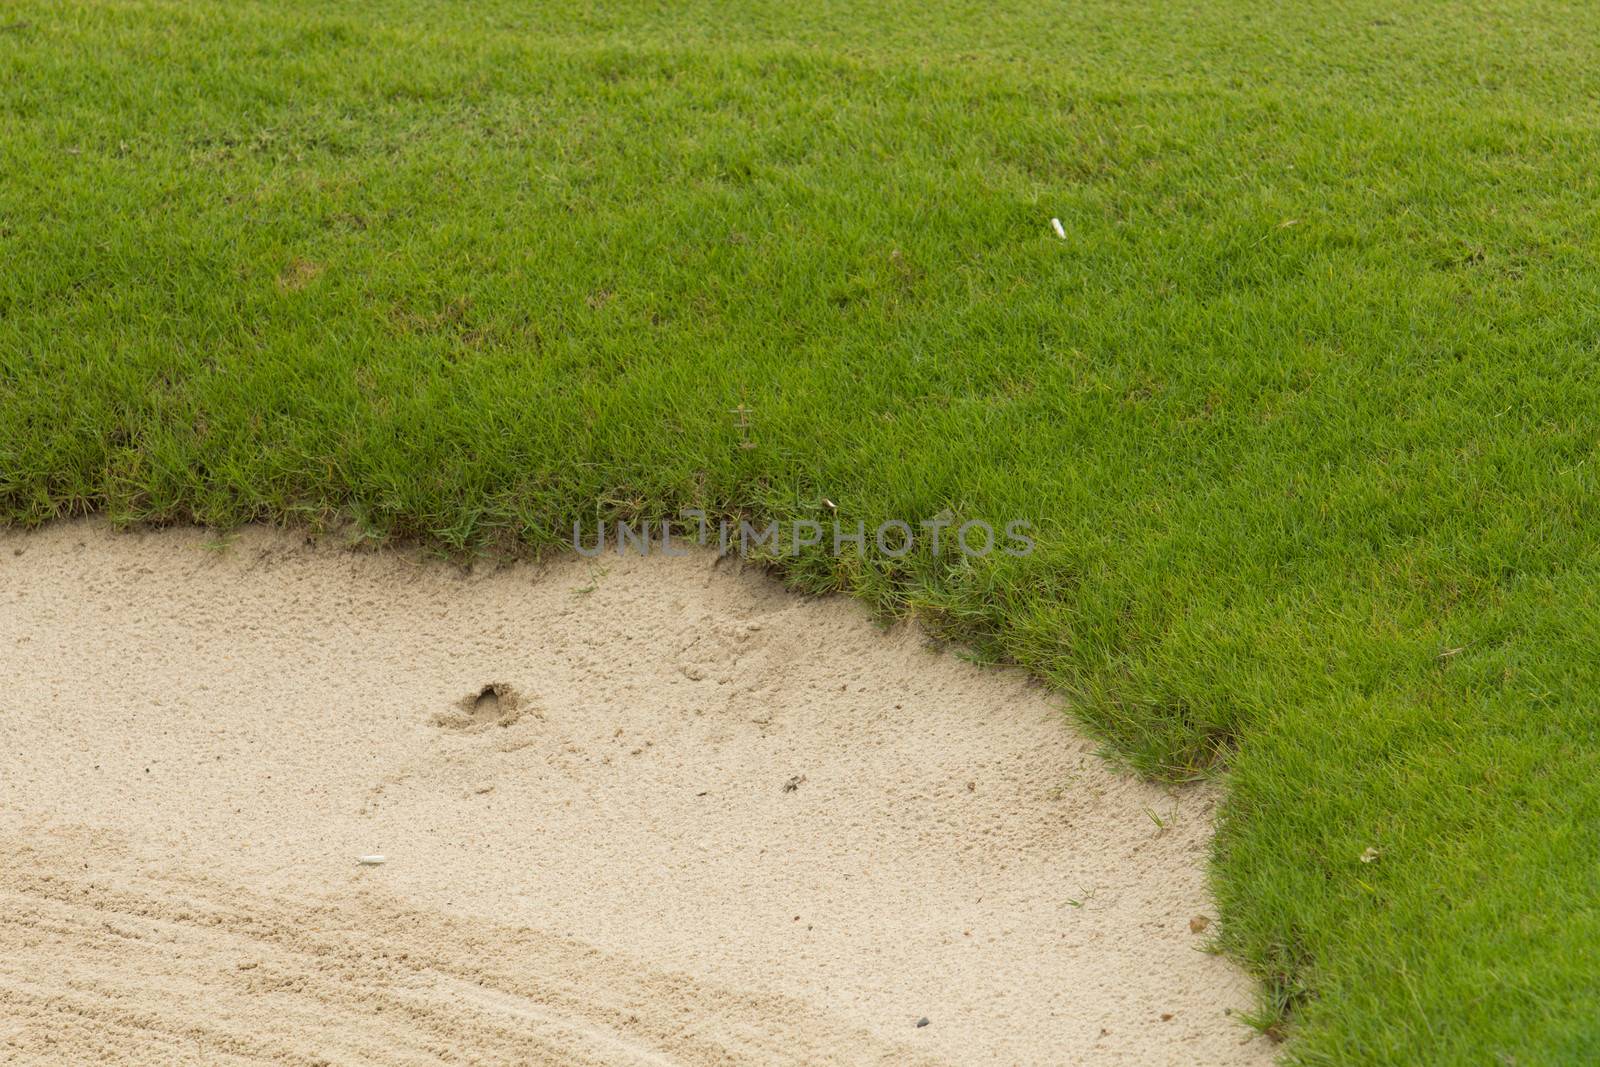 Golf sand trap on the green grass